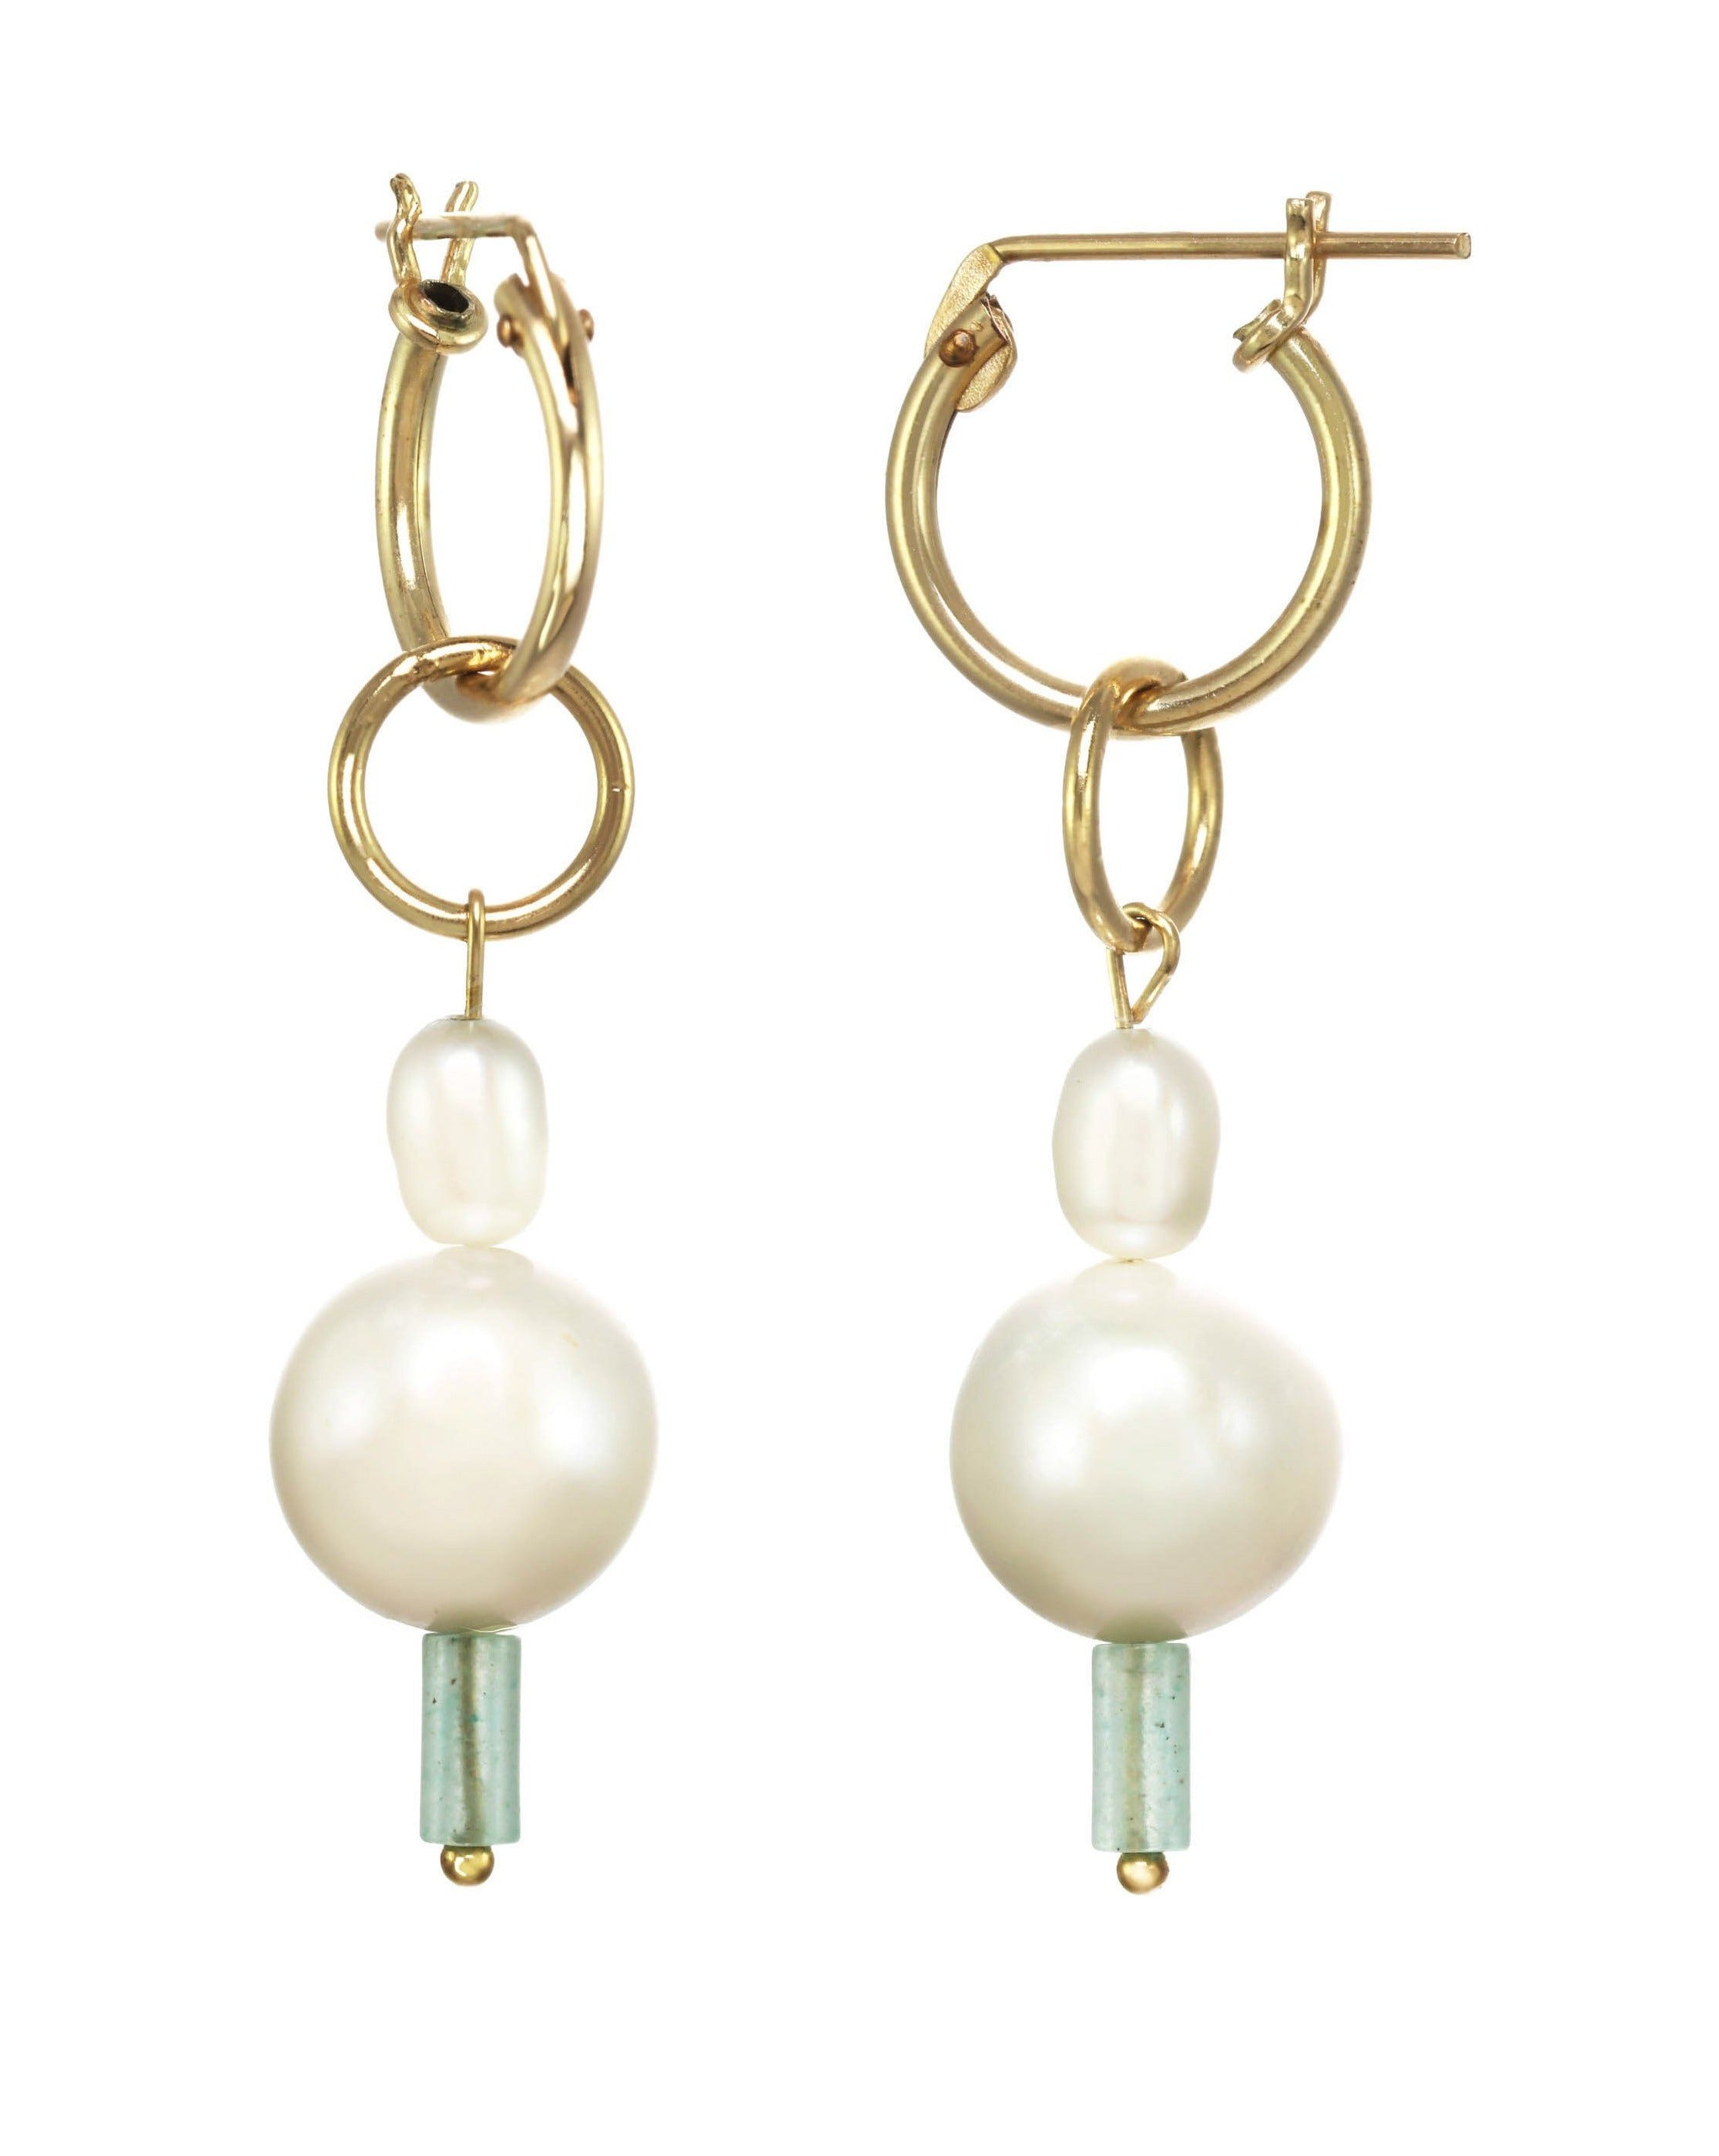 Tati Earrings by KOZAKH. Hoop earrings with 1.5 inches drop length, crafted in 14K Gold Filled, featuring a round freshwater pearl, a freshwater rice pearl, and a cylindrical Aventurine bead.